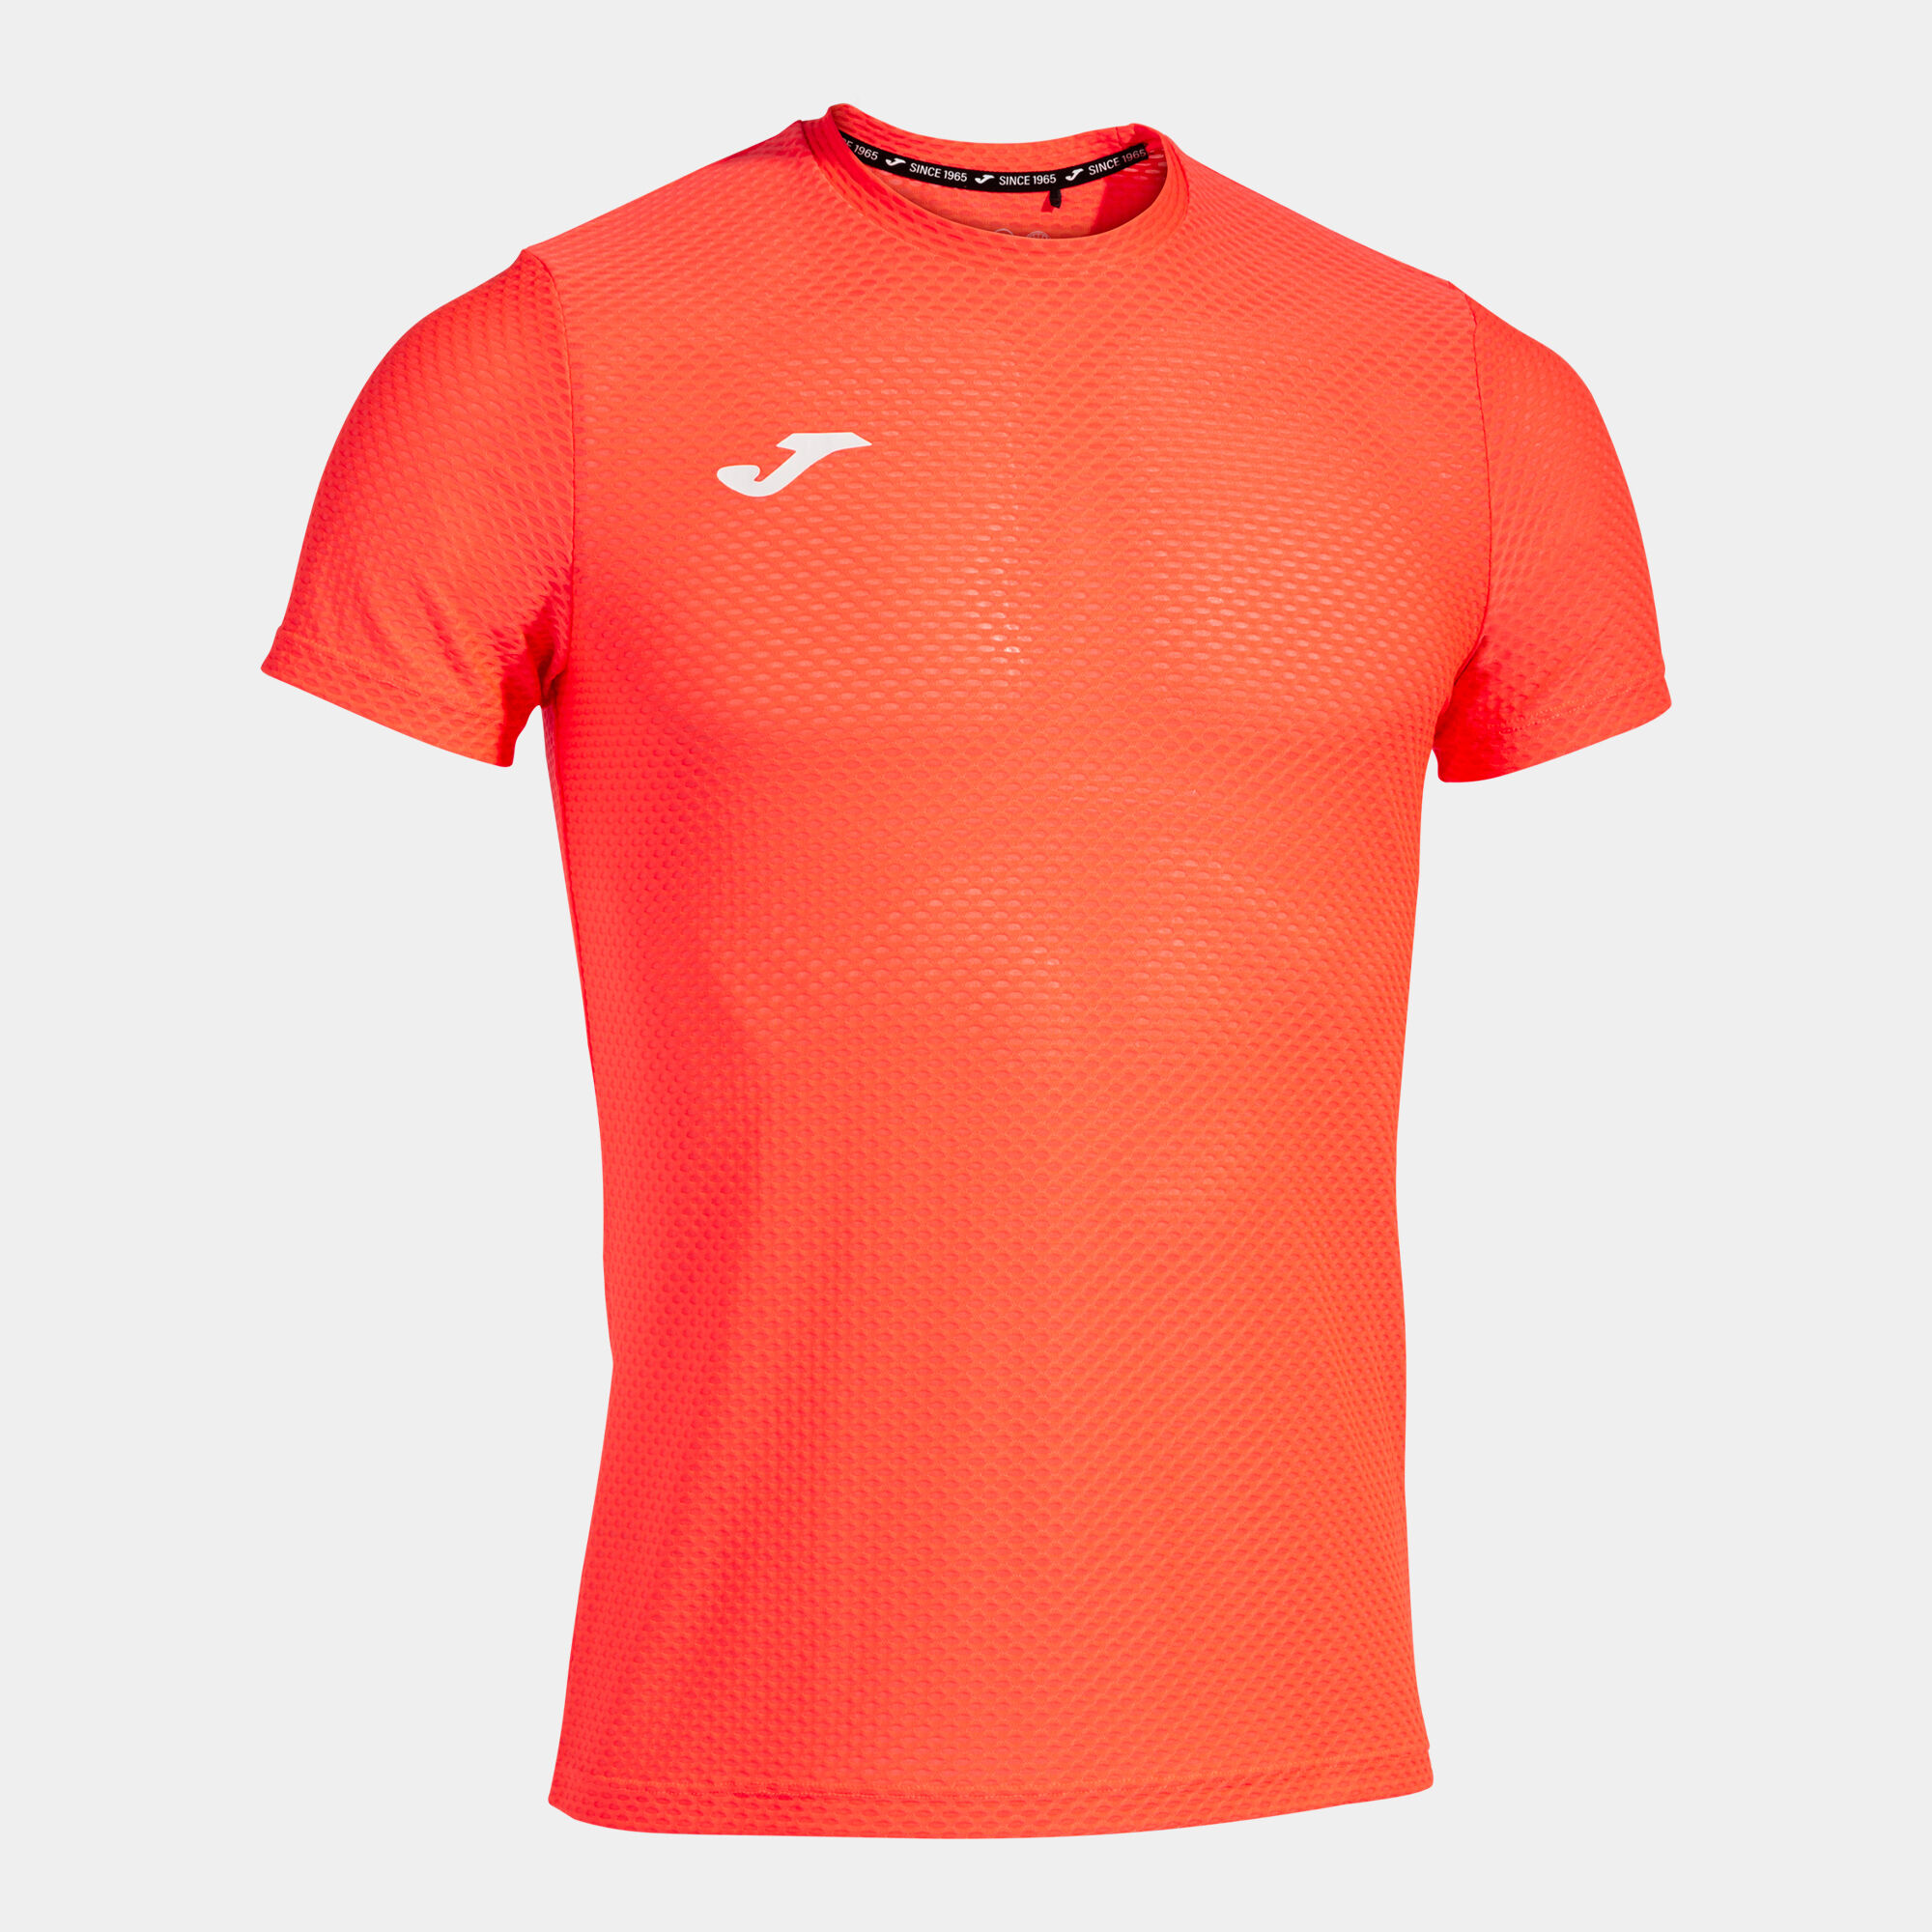 Maillot manches courtes homme R-City corail fluo